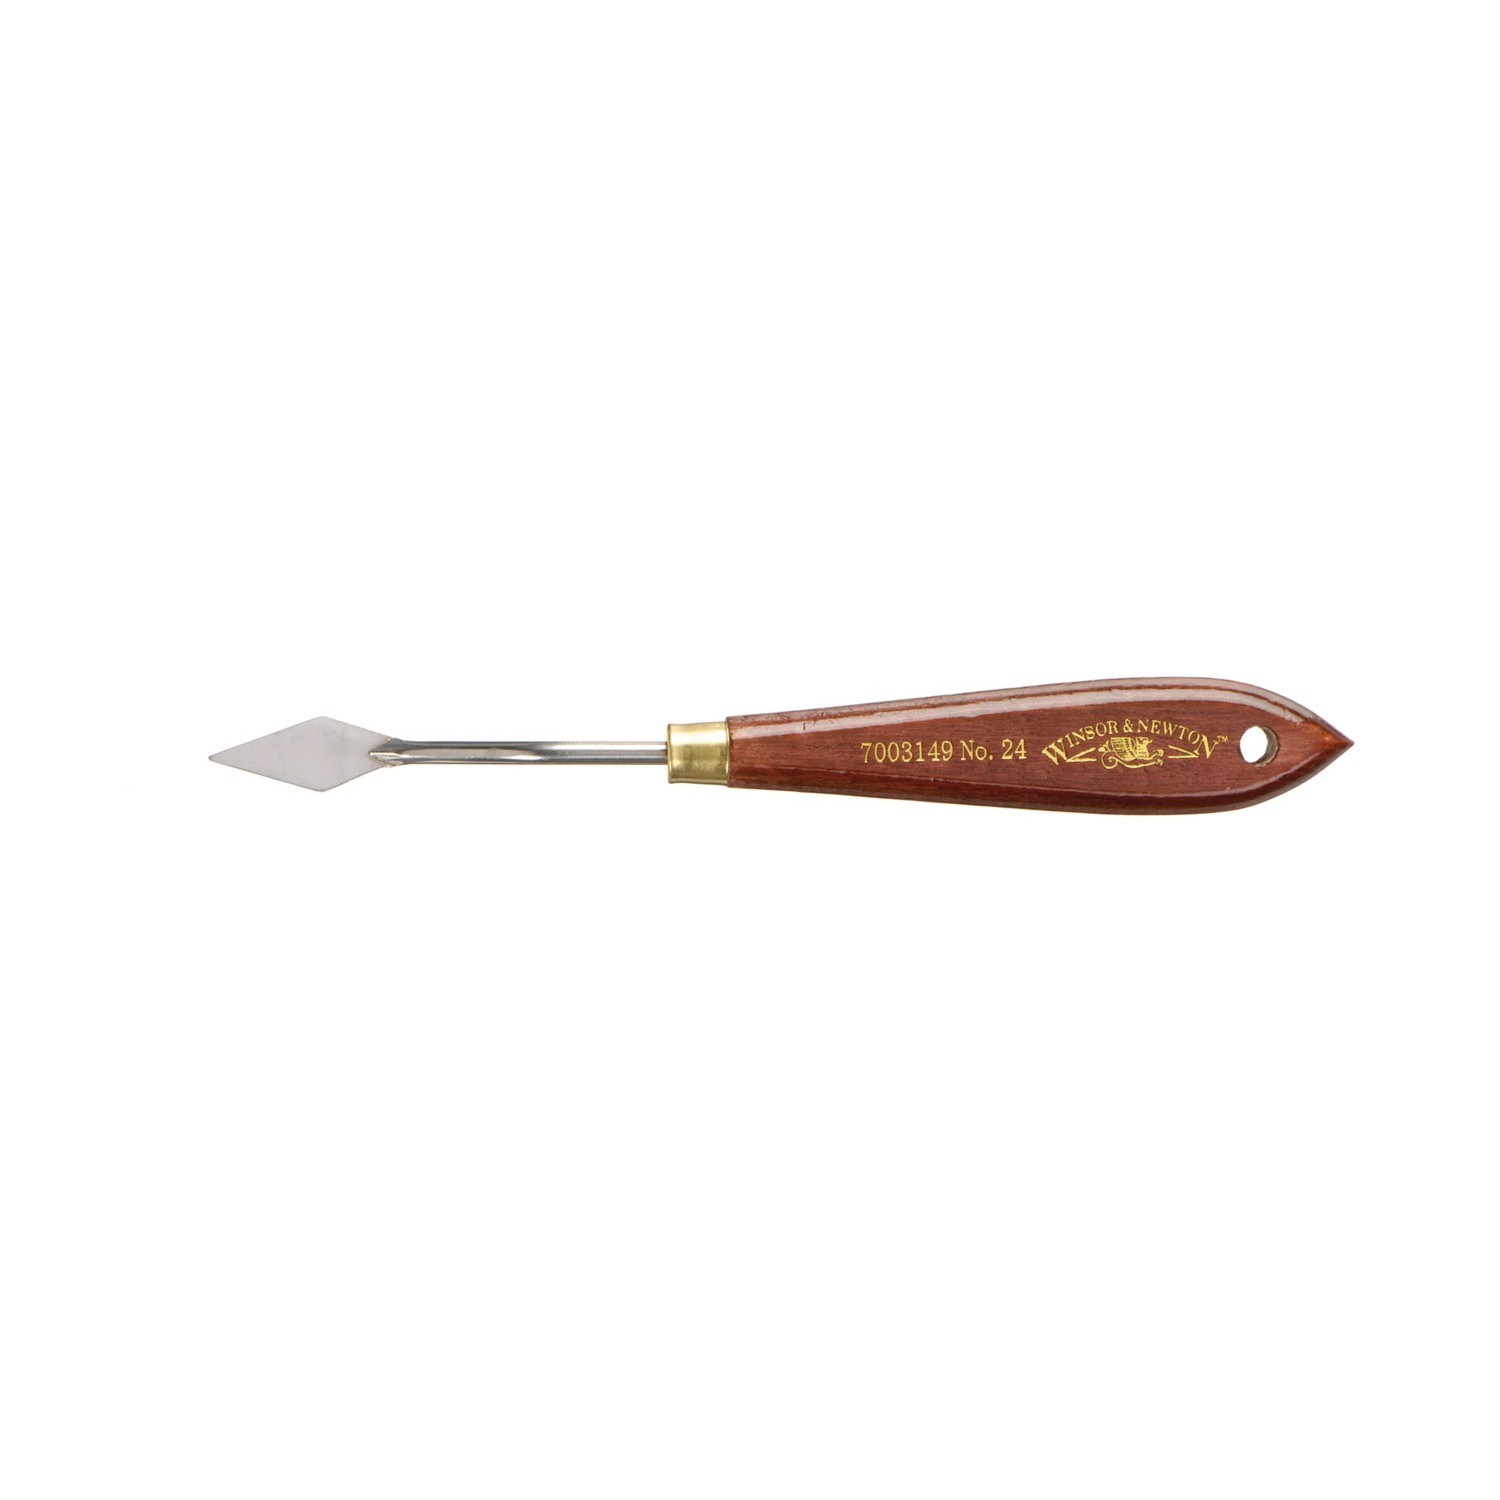 Winsor and Newton Painting Knives - No. 24 / 30mm Triangular Blade Image